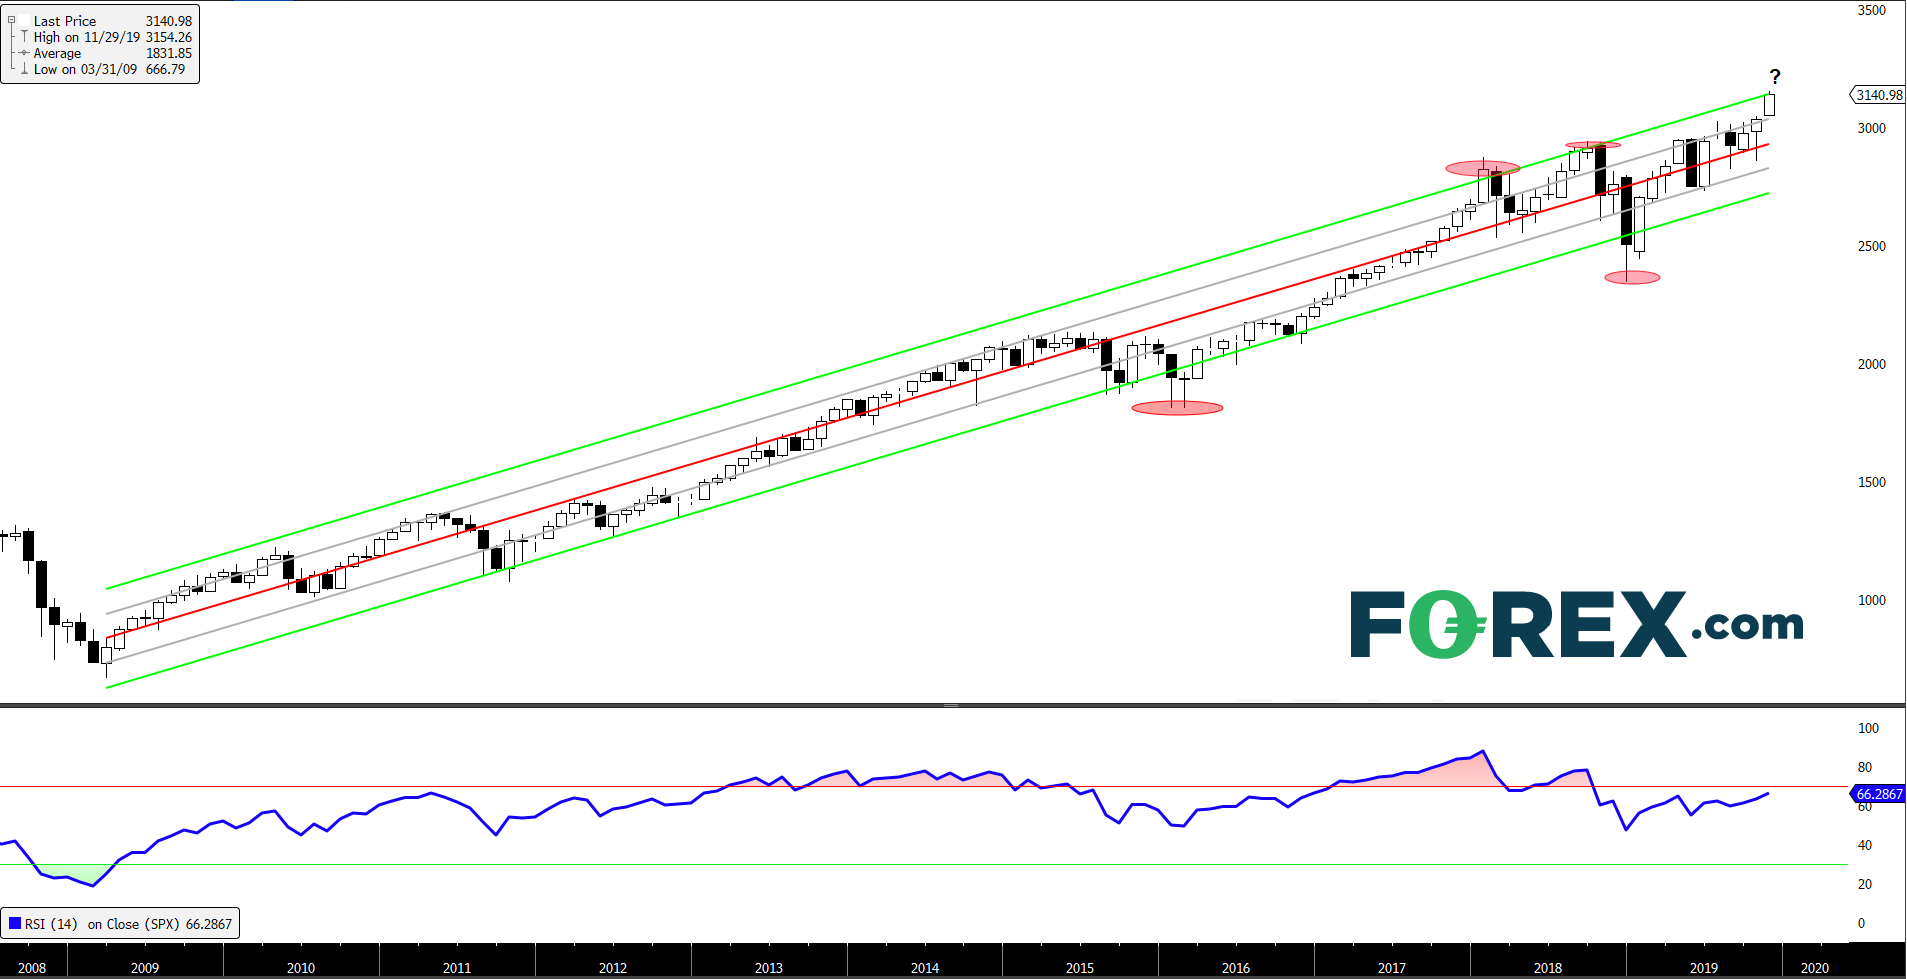 Chart tracking the US SP500 with a positive trend since 2006 . Published in January 2020 by FOREX.com